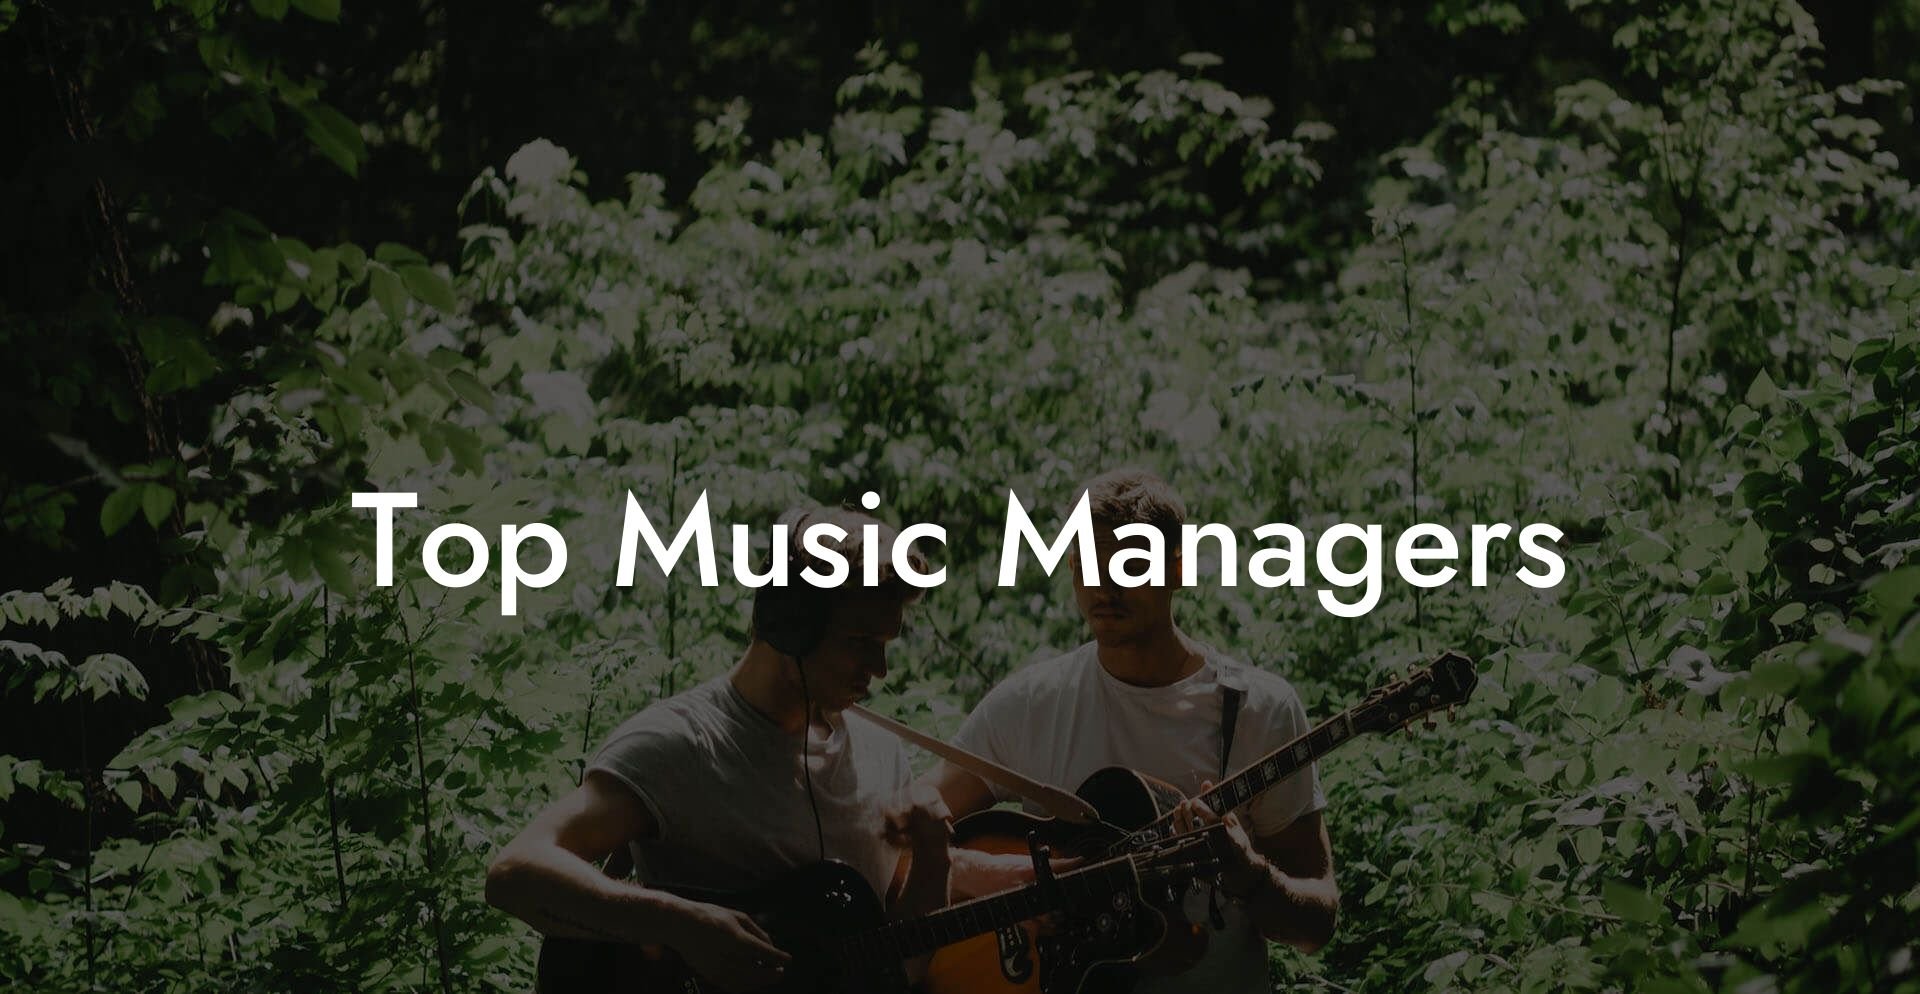 Top Music Managers